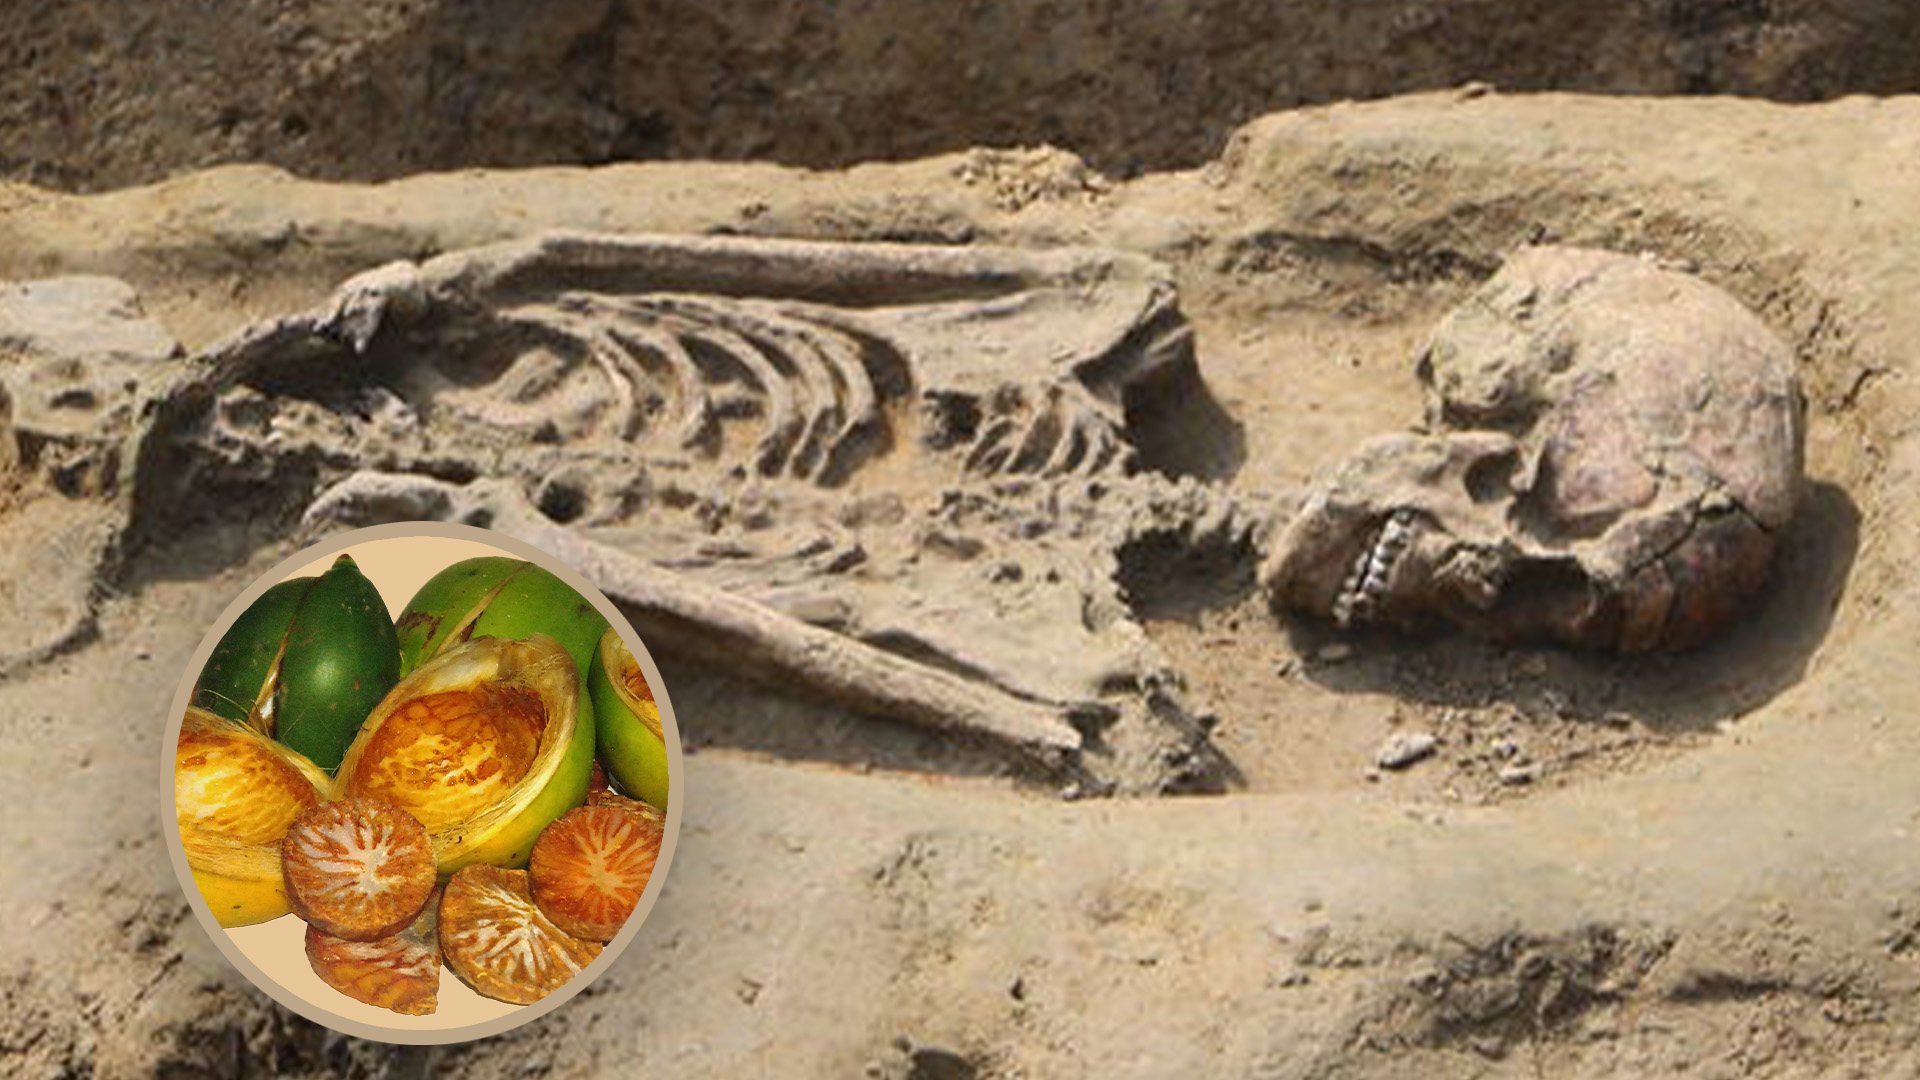 Unearthed 2,500-year-old human skeletons found in Taiwan hint at ancient indigenous tribes’ betel nut chewing habits. Photo: SCMP composite/Shutterstock/cabcy.gov.tw